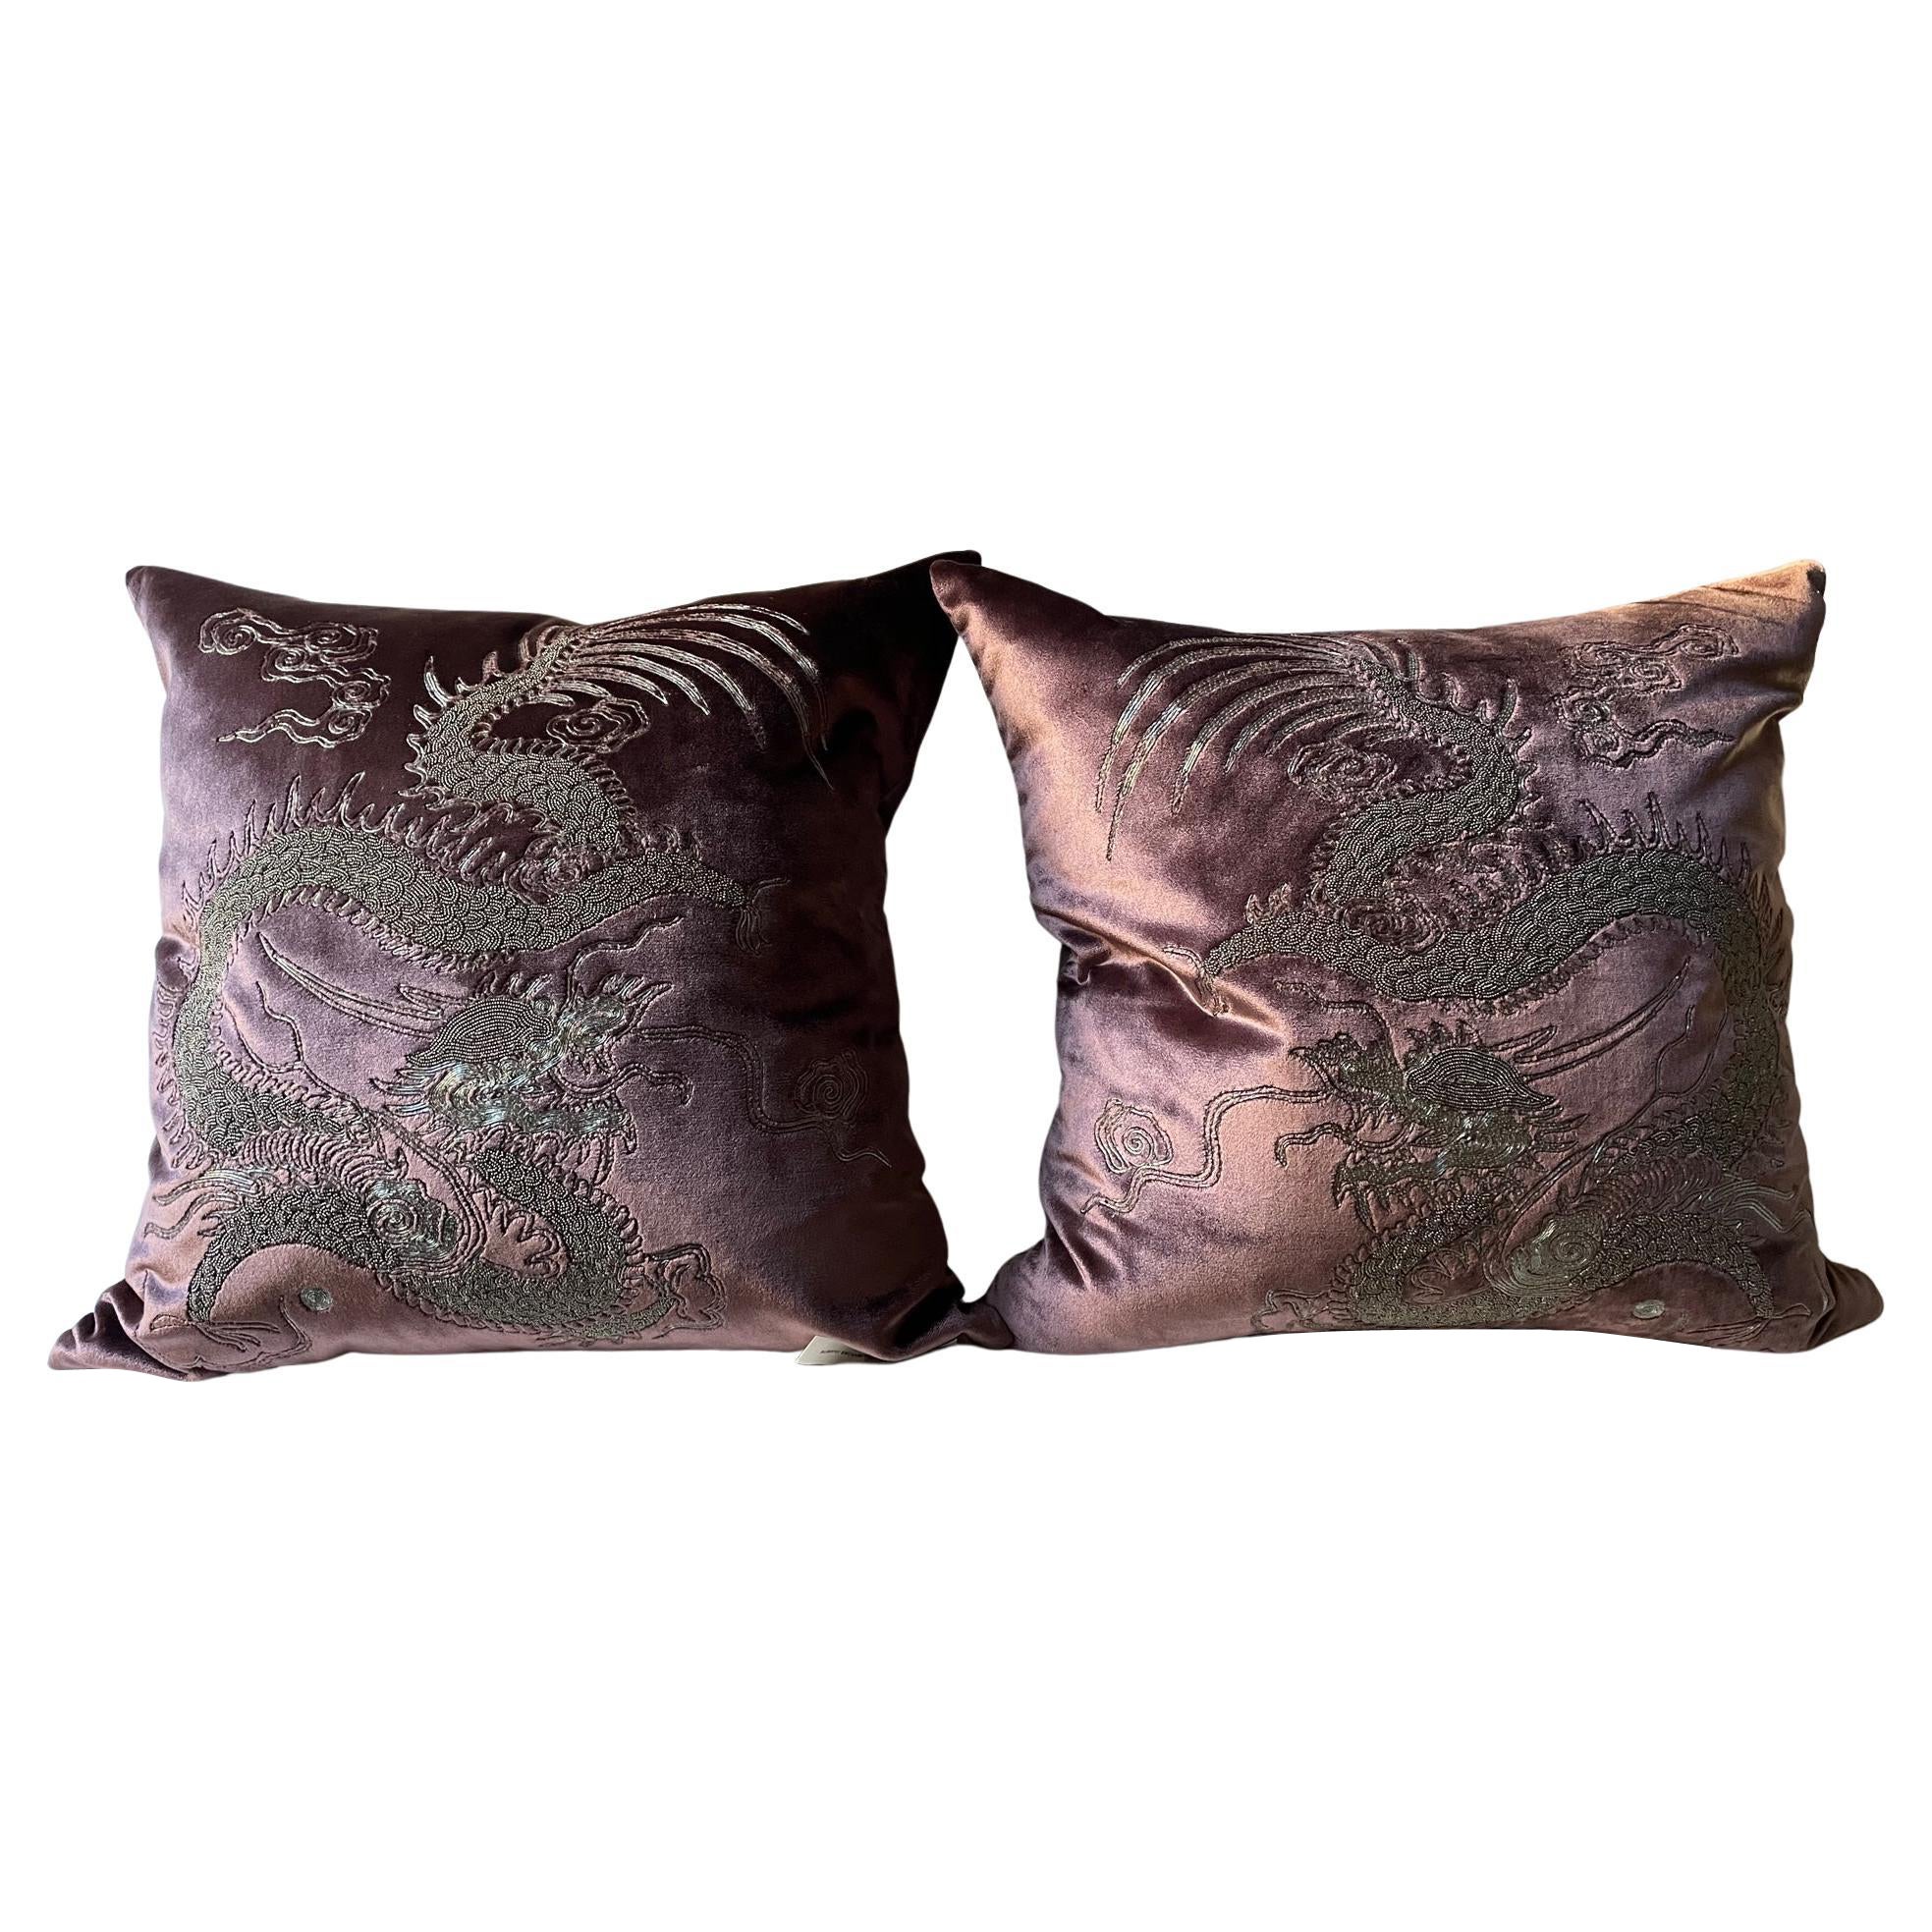 Dragon Cushions Hand Embroidery Silver Beading on Silk Velvet Colour Heather For Sale